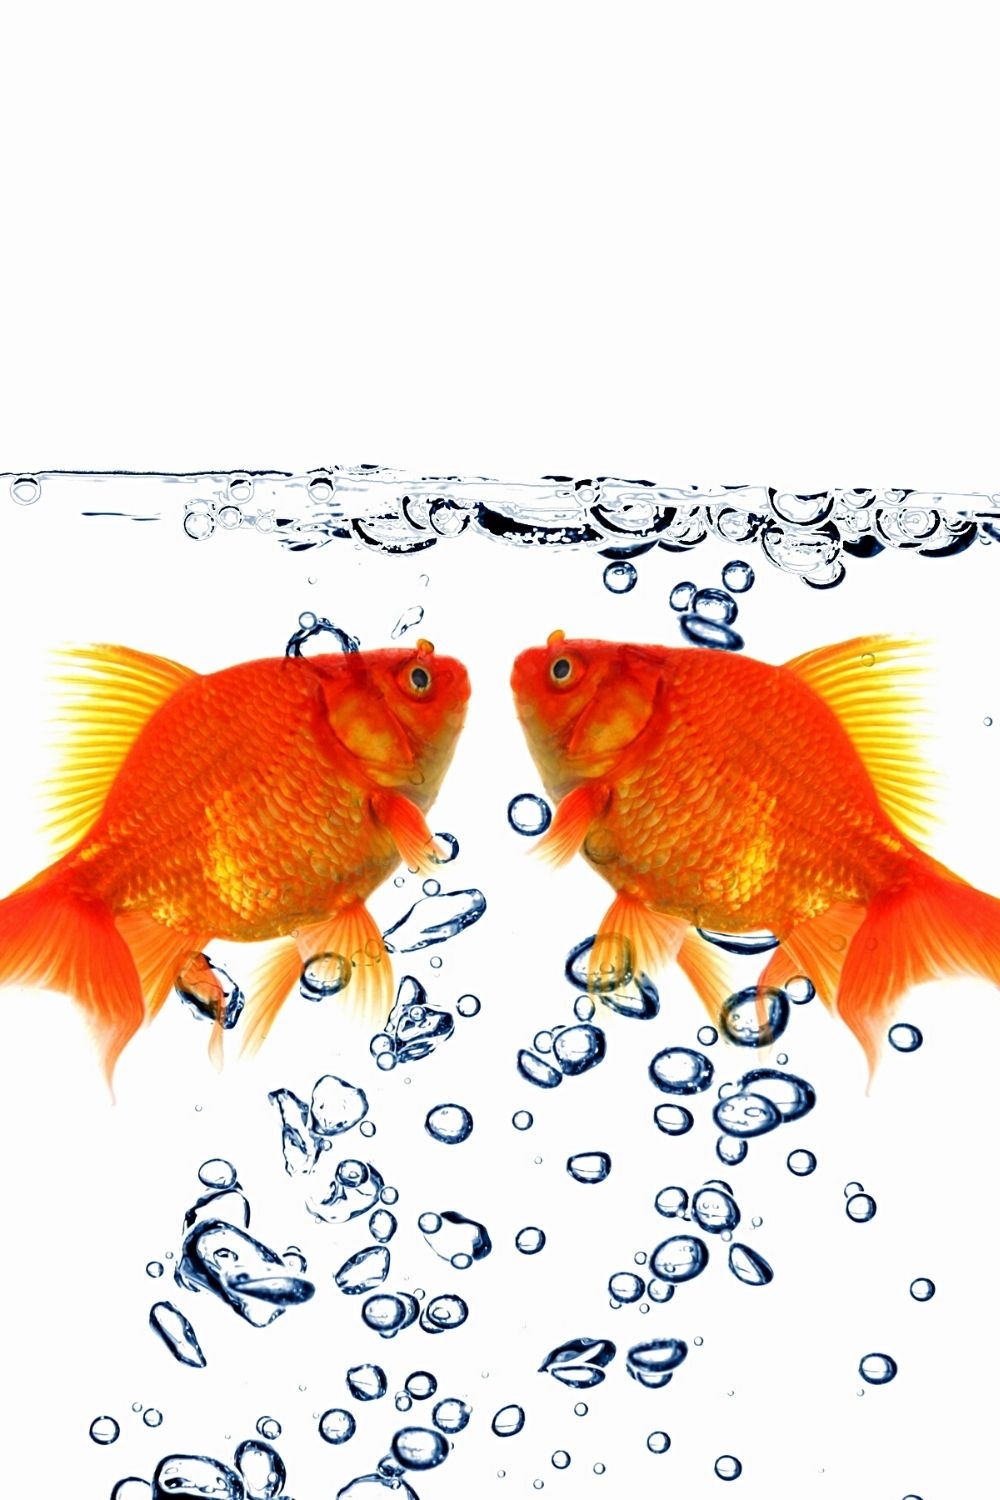 If male goldfish chase your female goldfish, it's possible it is pregnant